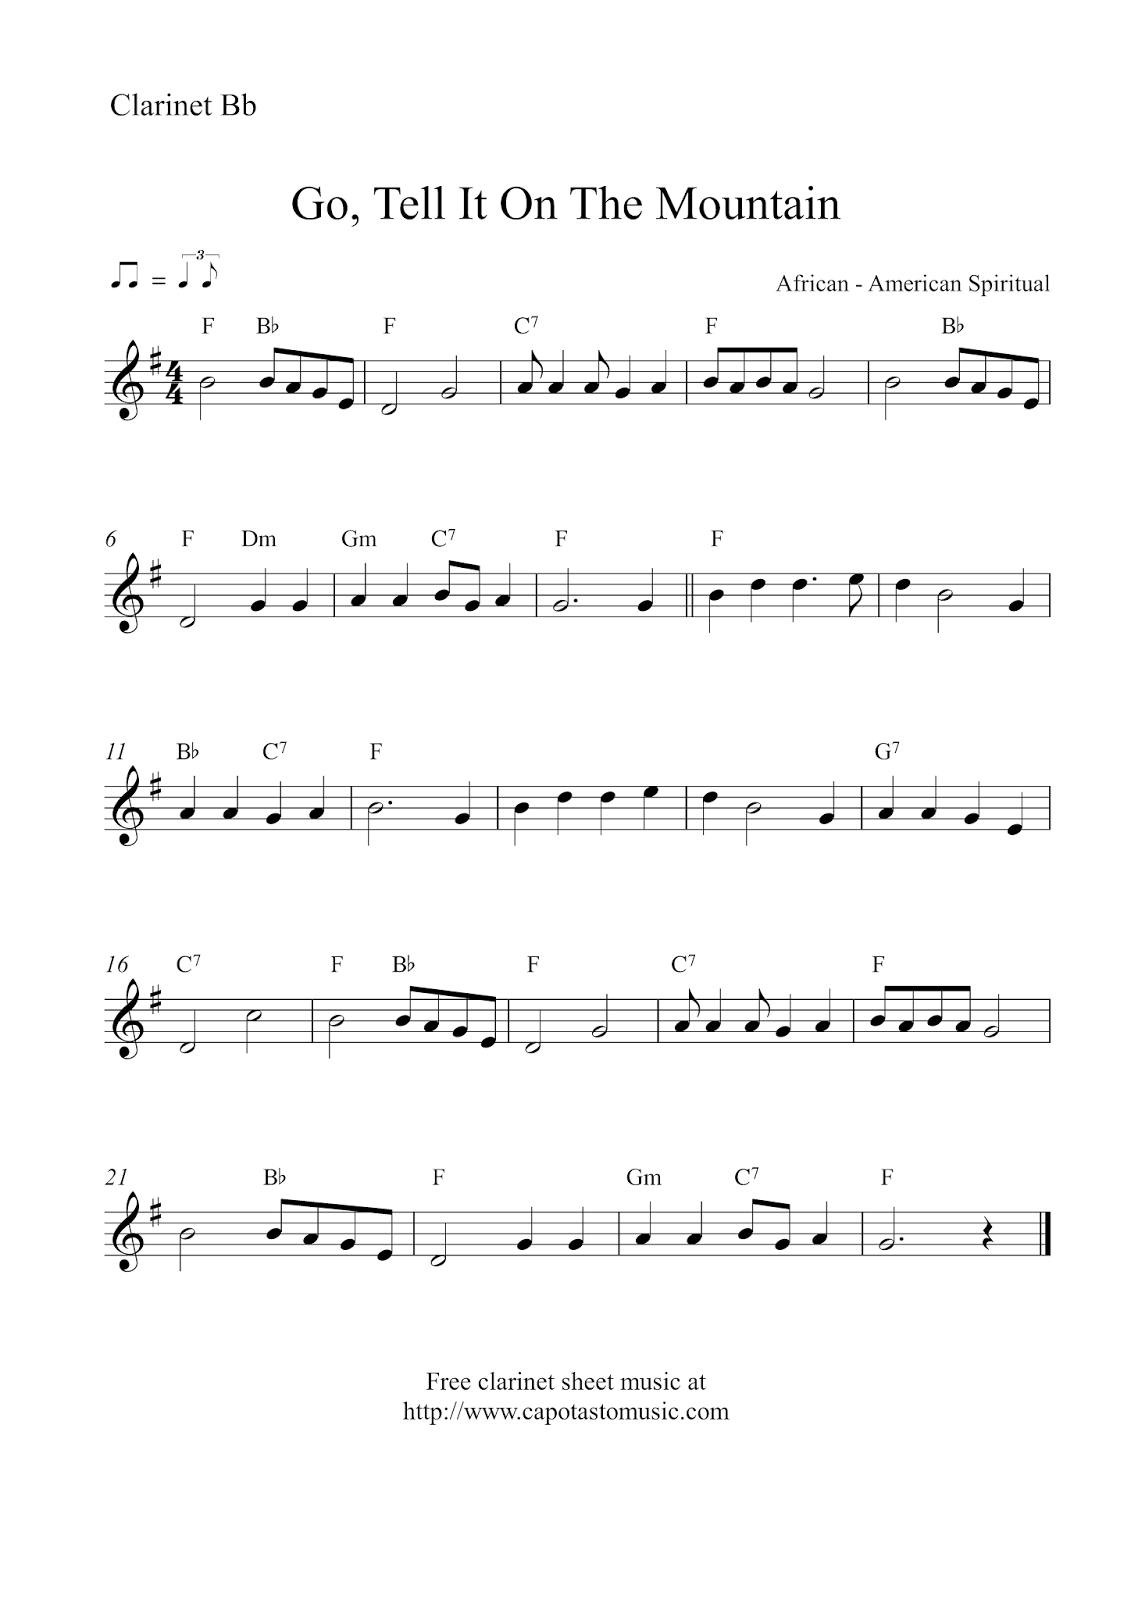 Free Christmas Clarinet Sheet Music - Go, Tell It On The Mountain - Free Printable Christmas Sheet Music For Clarinet